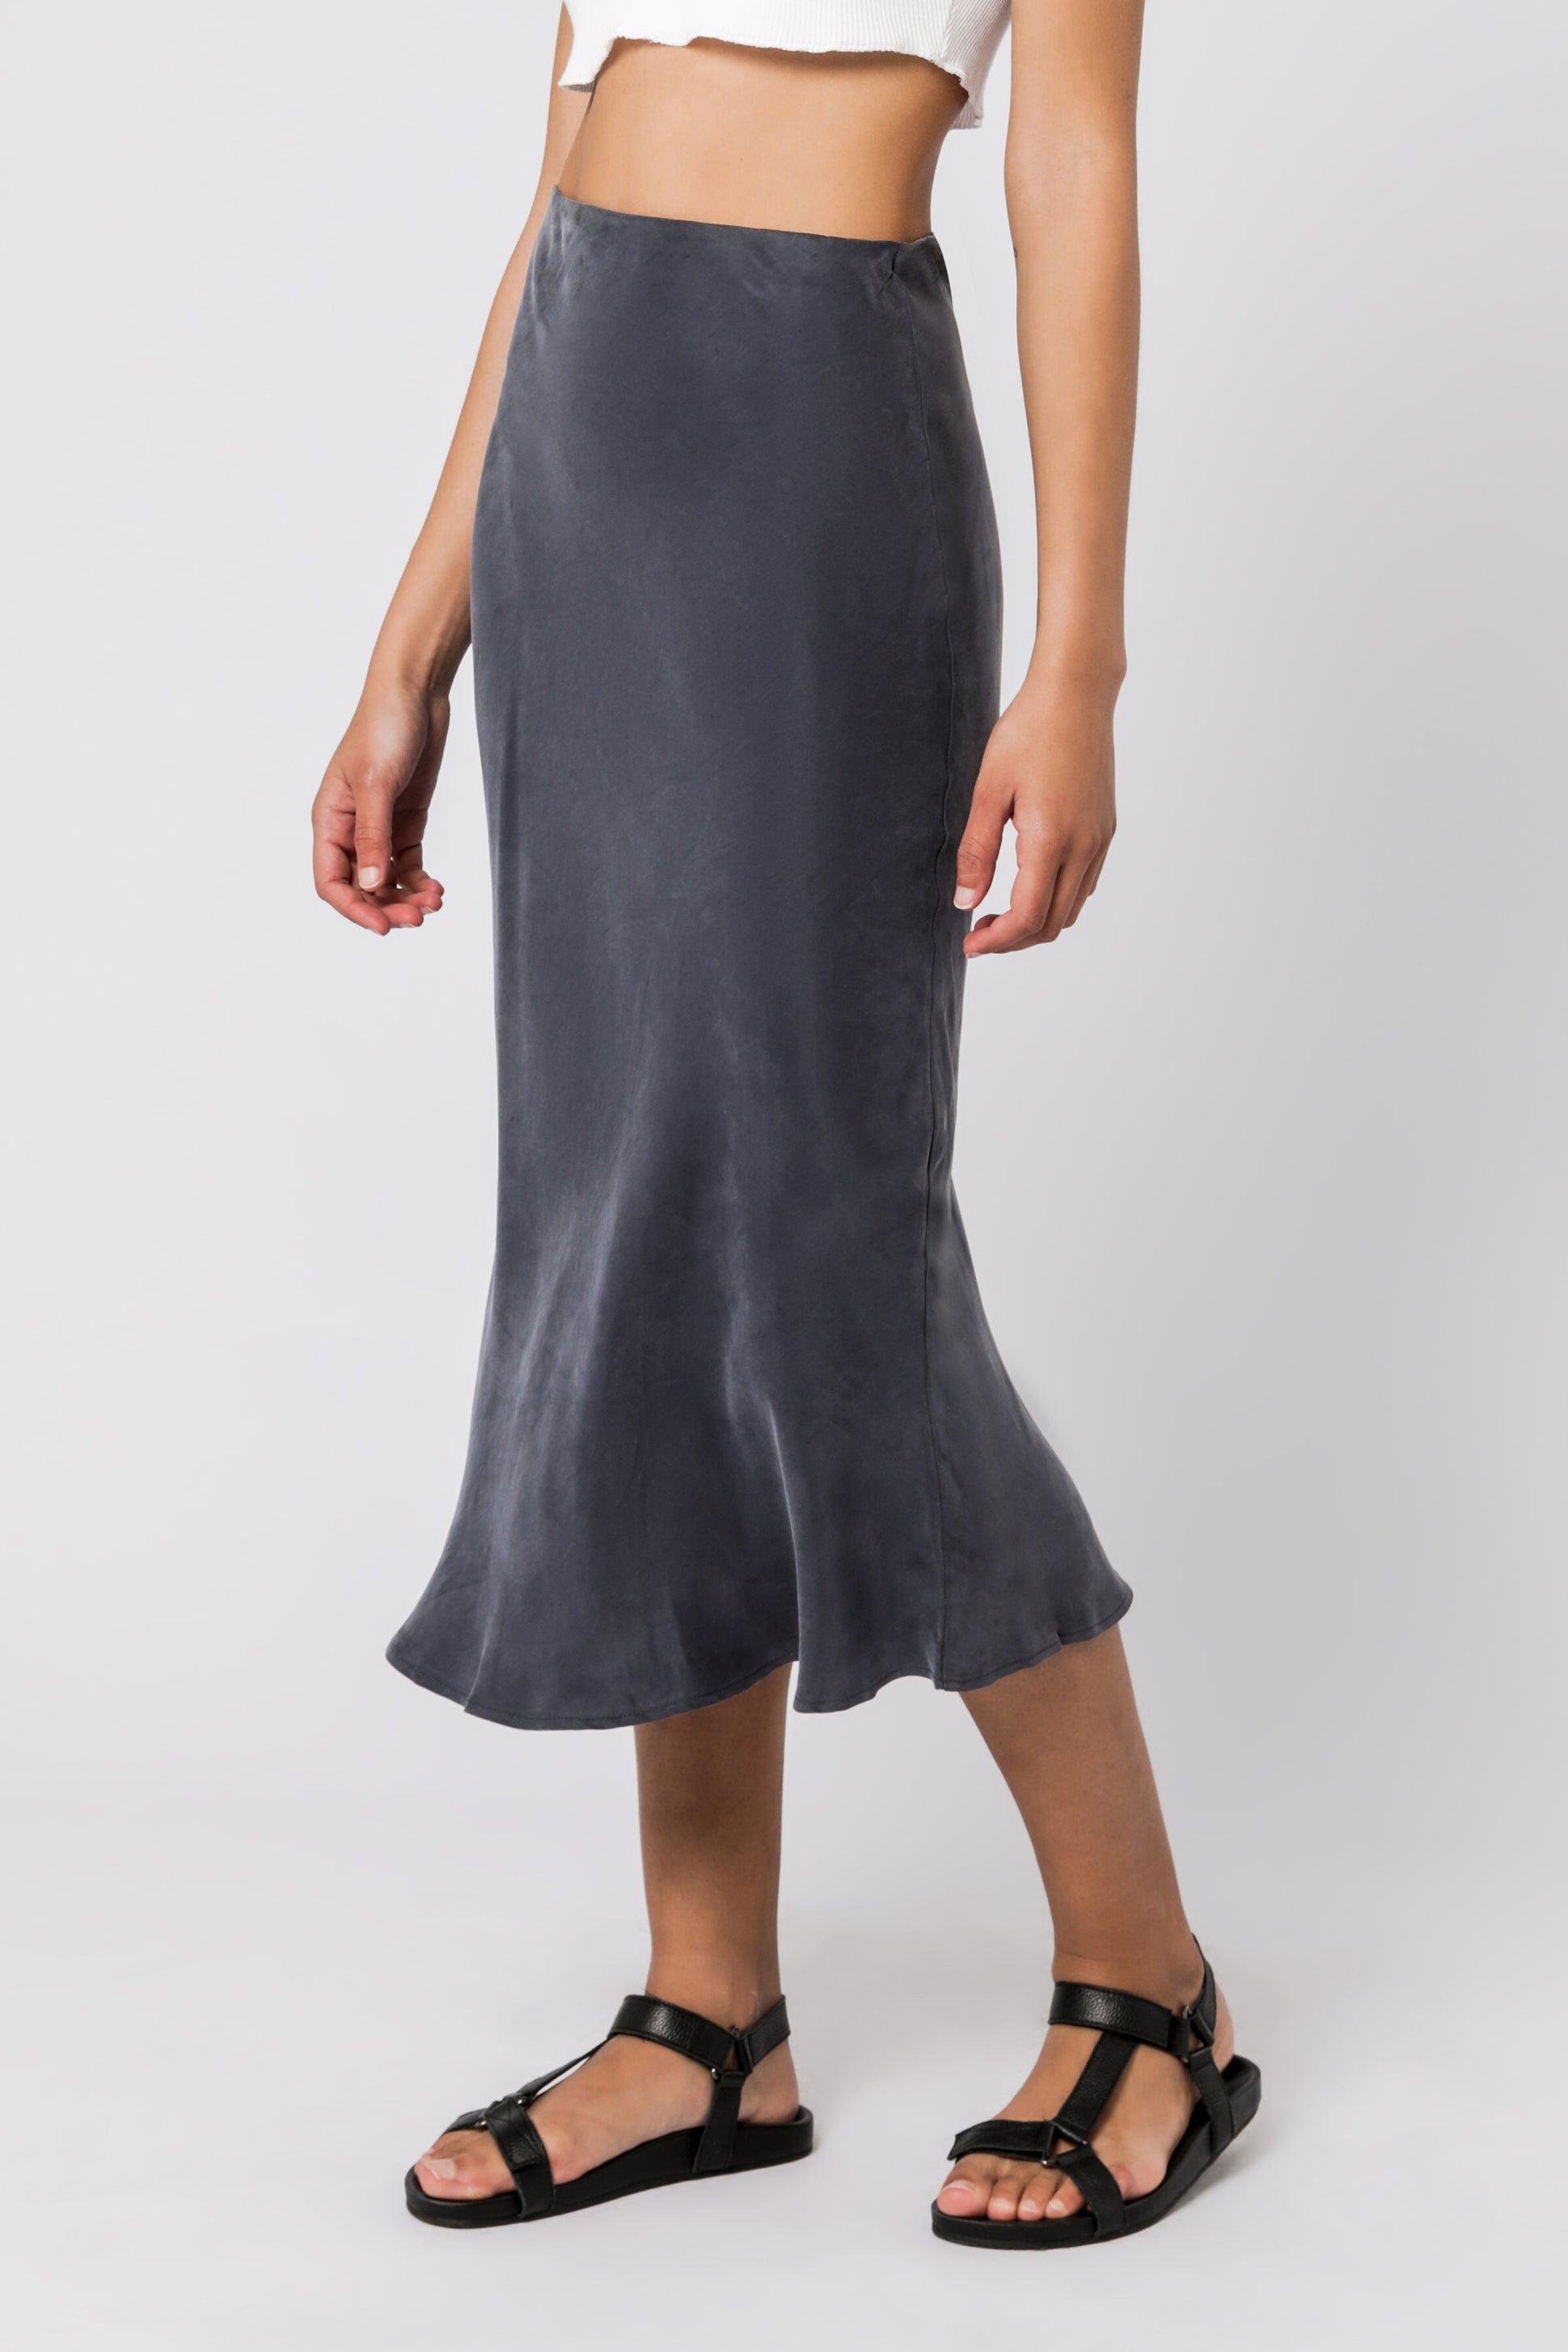 Nude Lucy nude classic skirt washed navy skirt